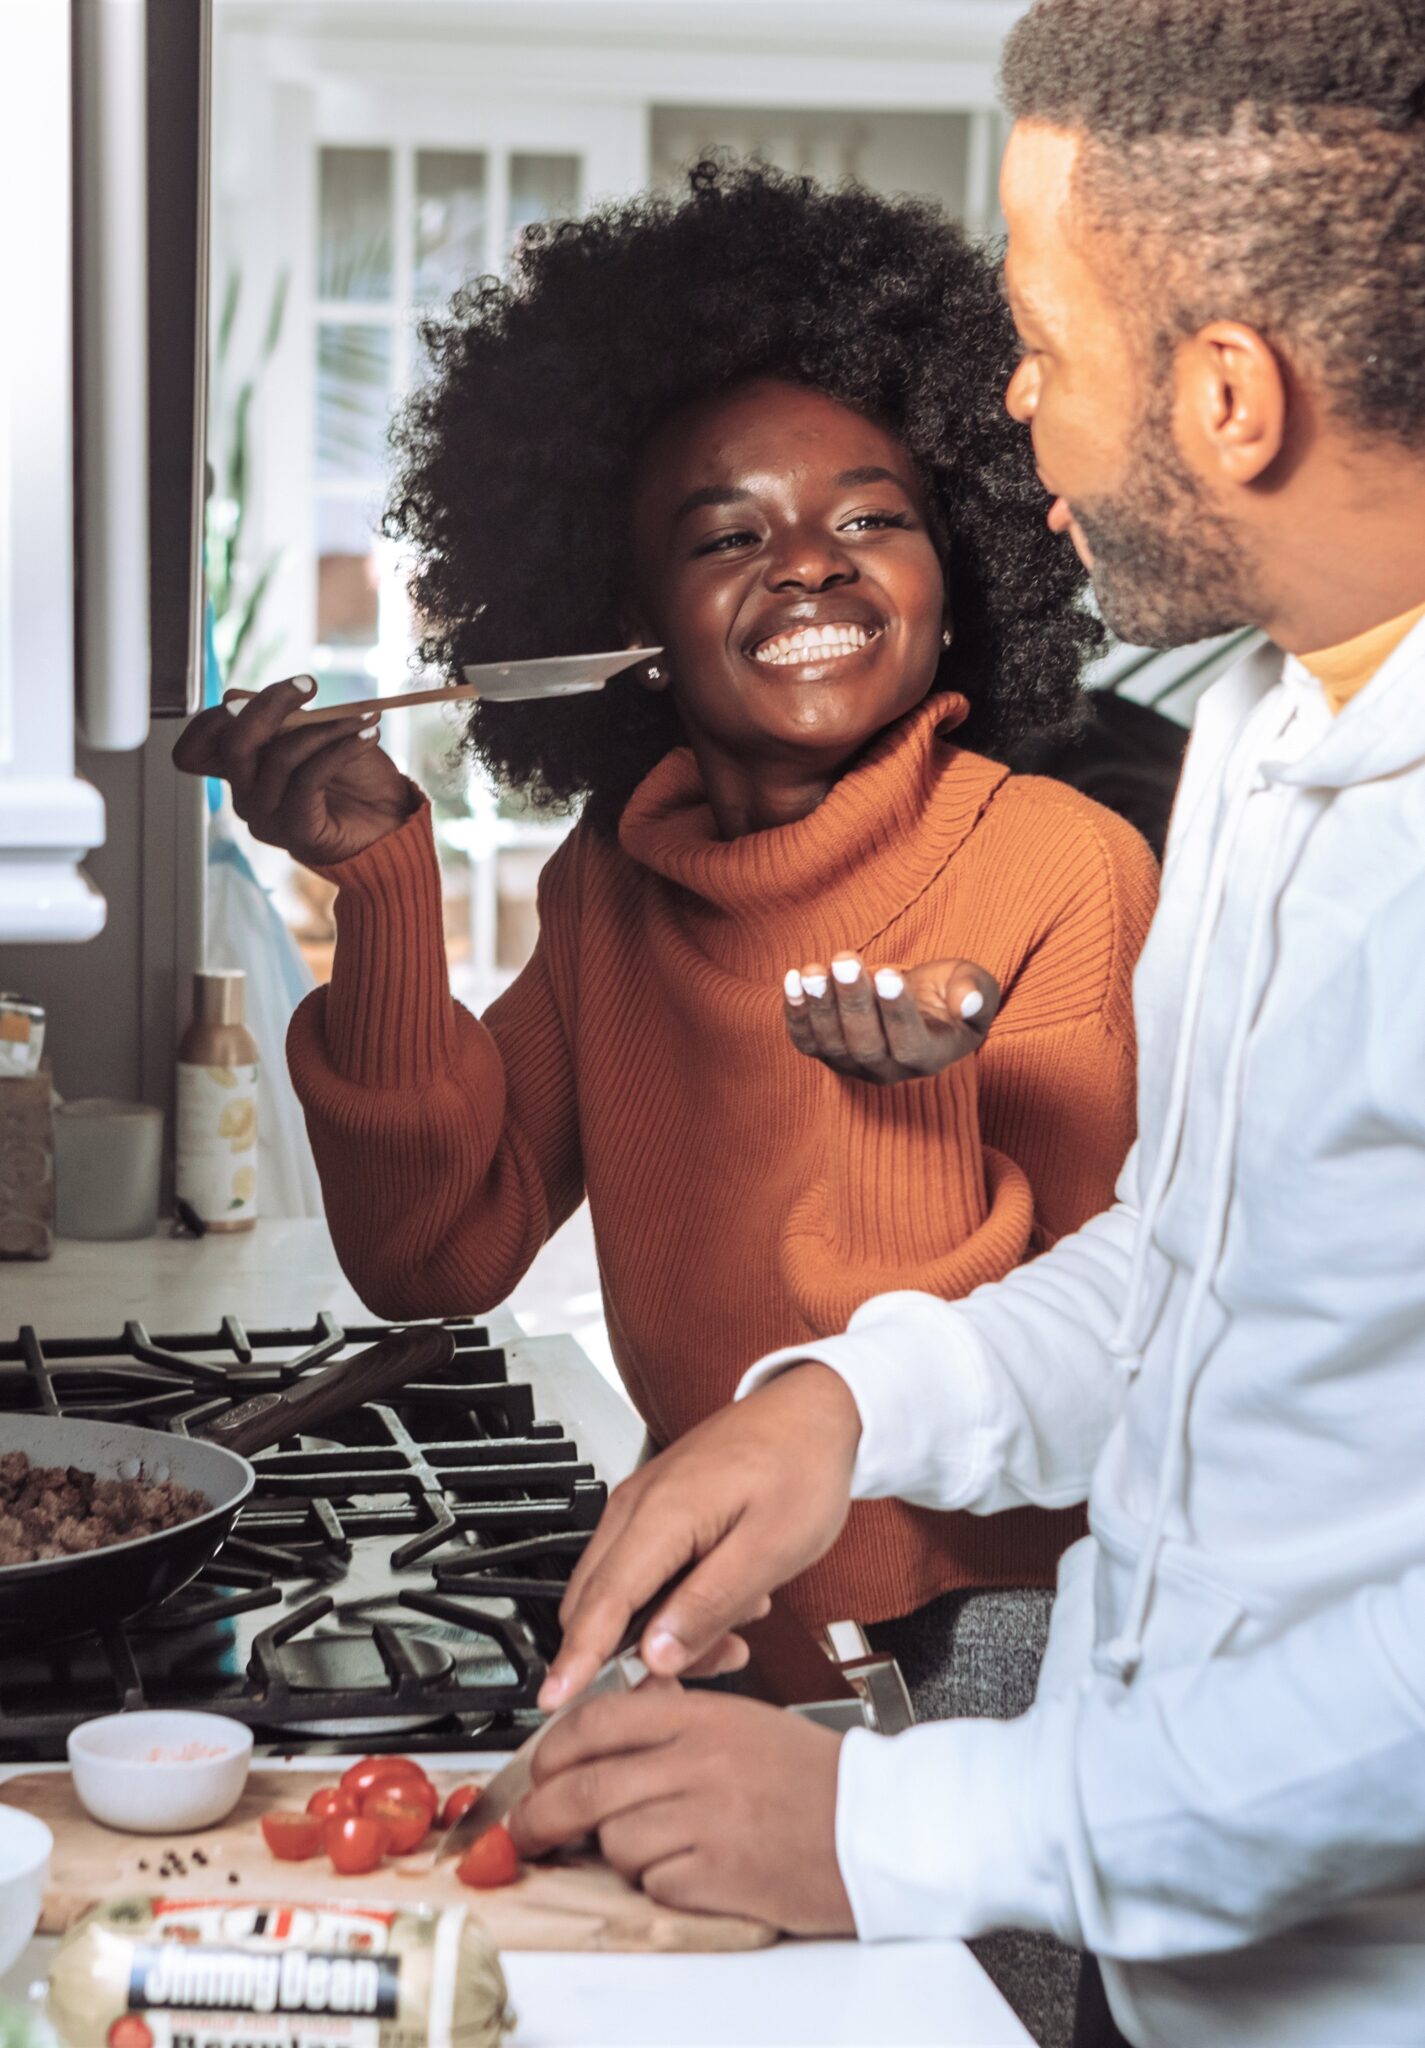 A young couple cook together and the woman is giving her partner a taste of their food.